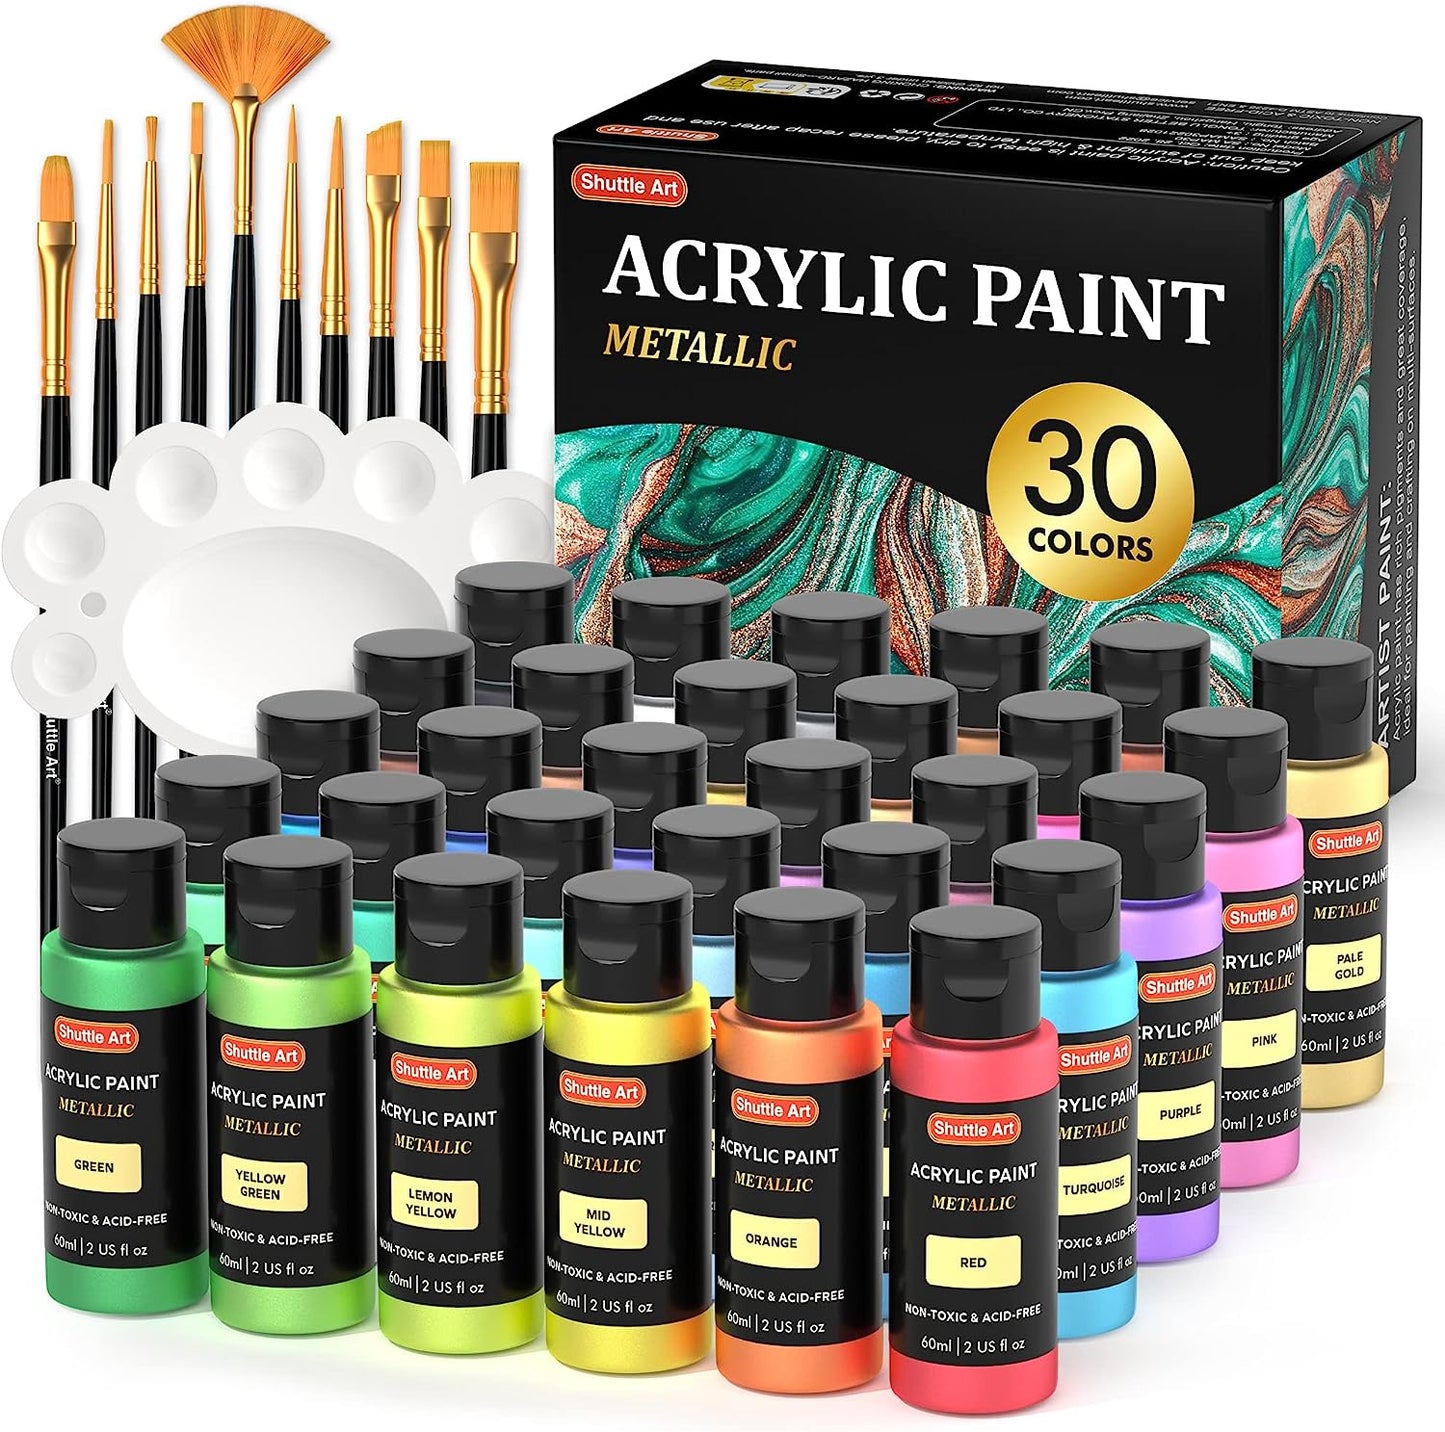 72 Pack Acrylic Paint Set,  60 Colors Acrylic Paint Including Extra White Black & 12 Brushes, 2Oz/60Ml, Rich Pigmented, Water Proof, Ideal for Artists, Beginners on Canvas Rock Wood Ceramic